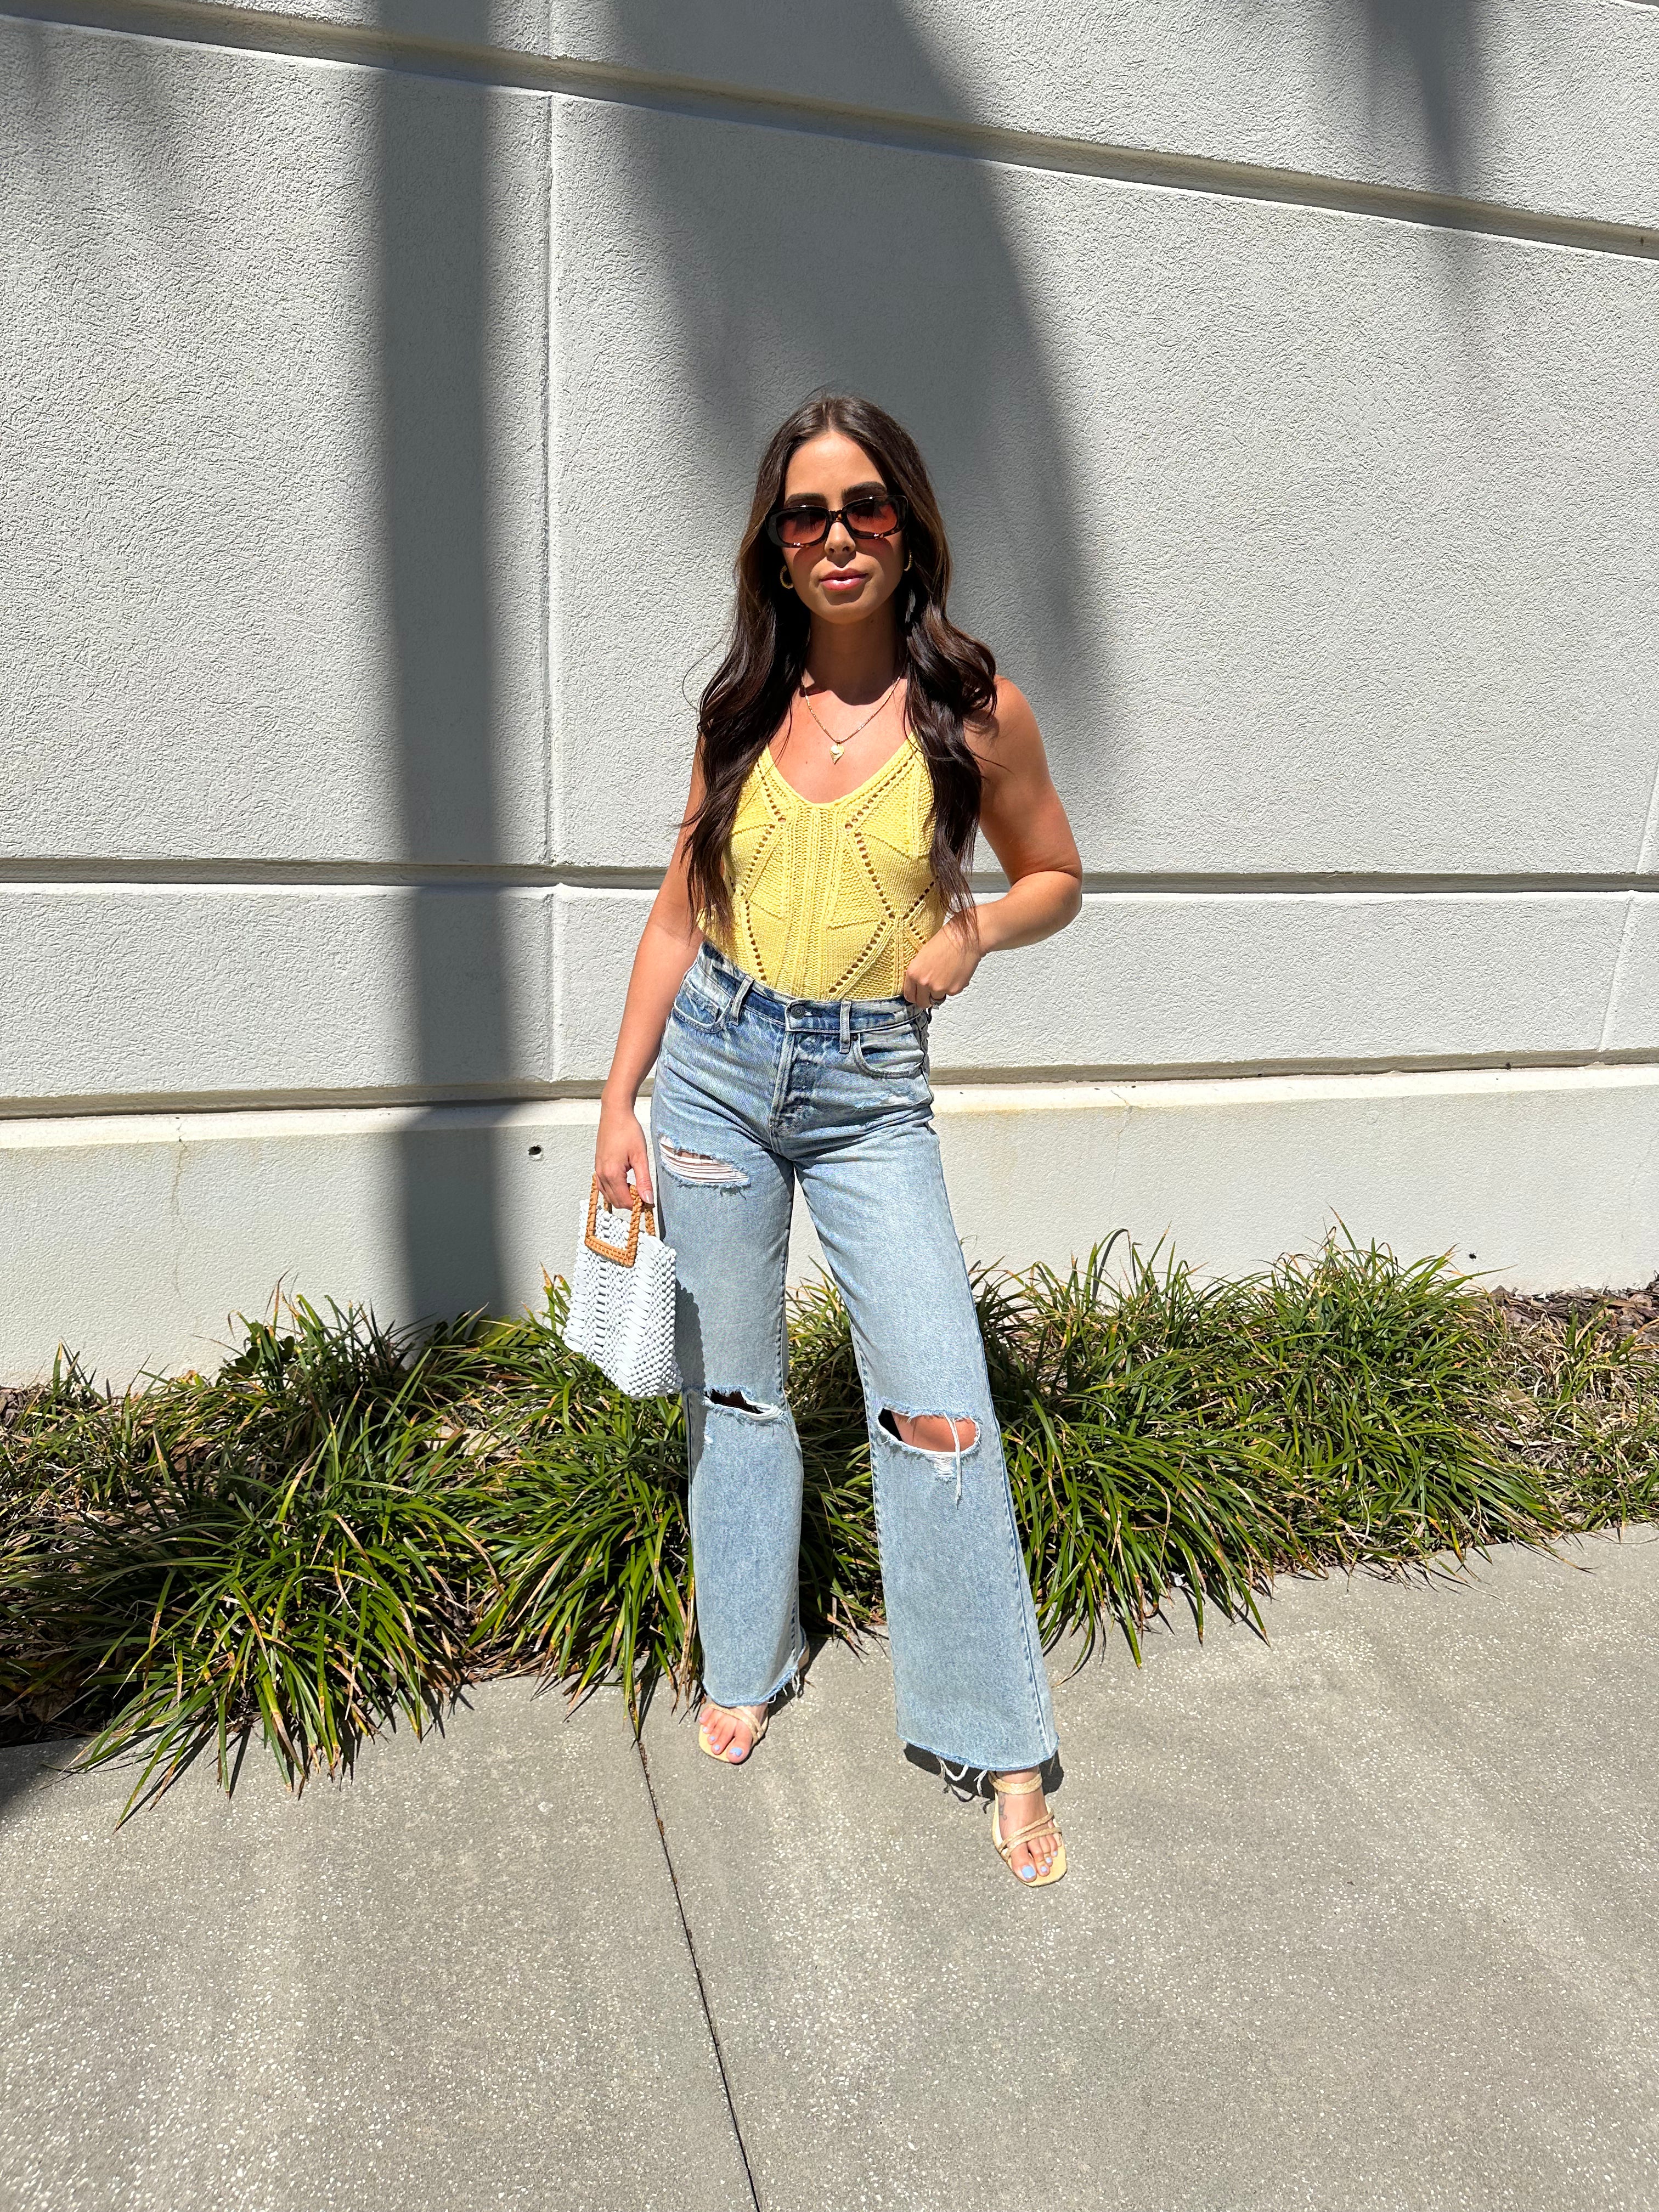 Bring Your Own Sunshine Crochet Top